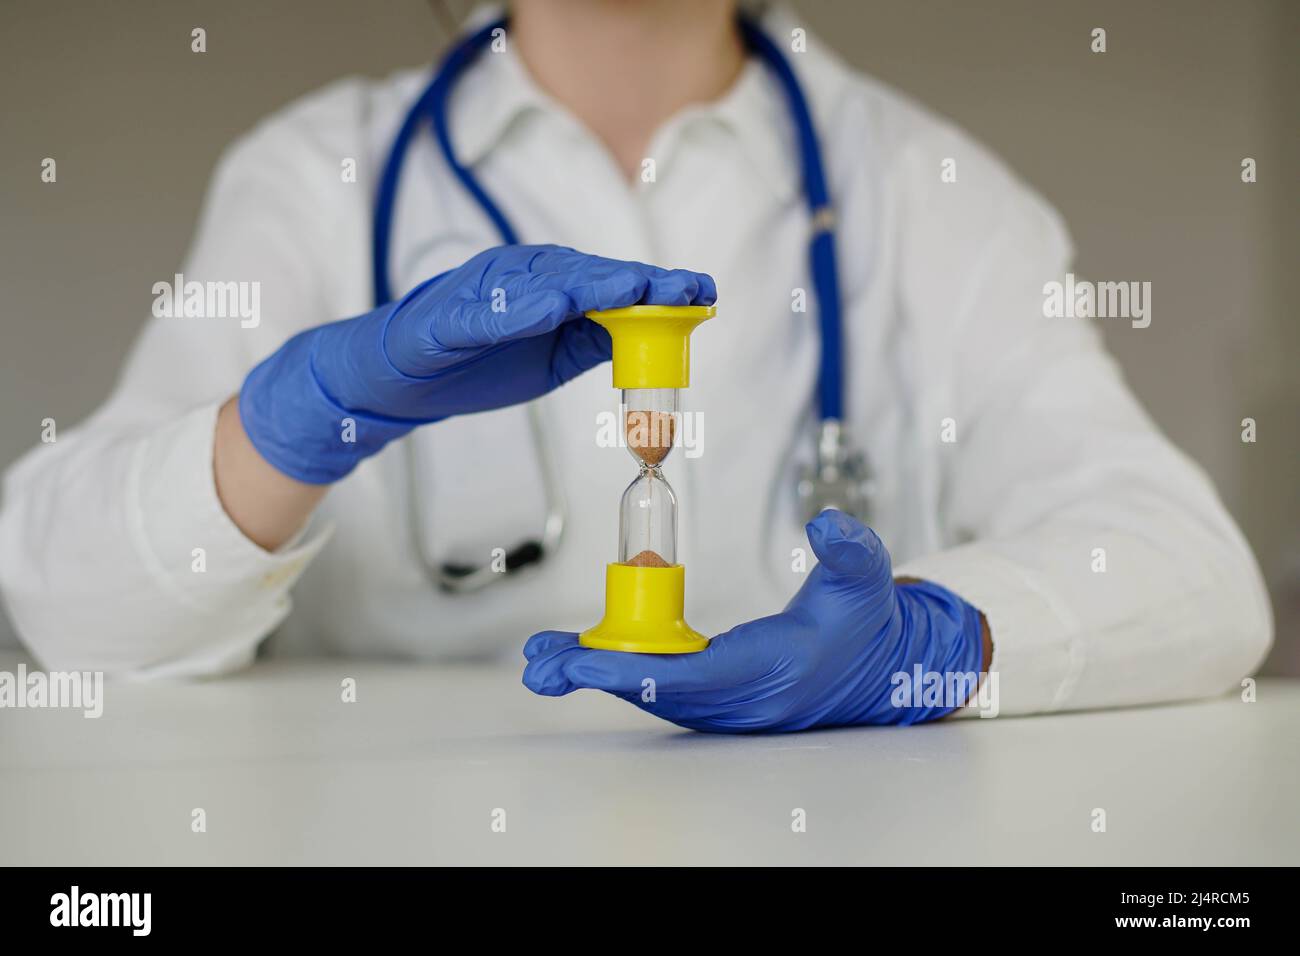 Overtime working hours of medical worker. Doctor in blue gloves holds an hourglass. Stock Photo